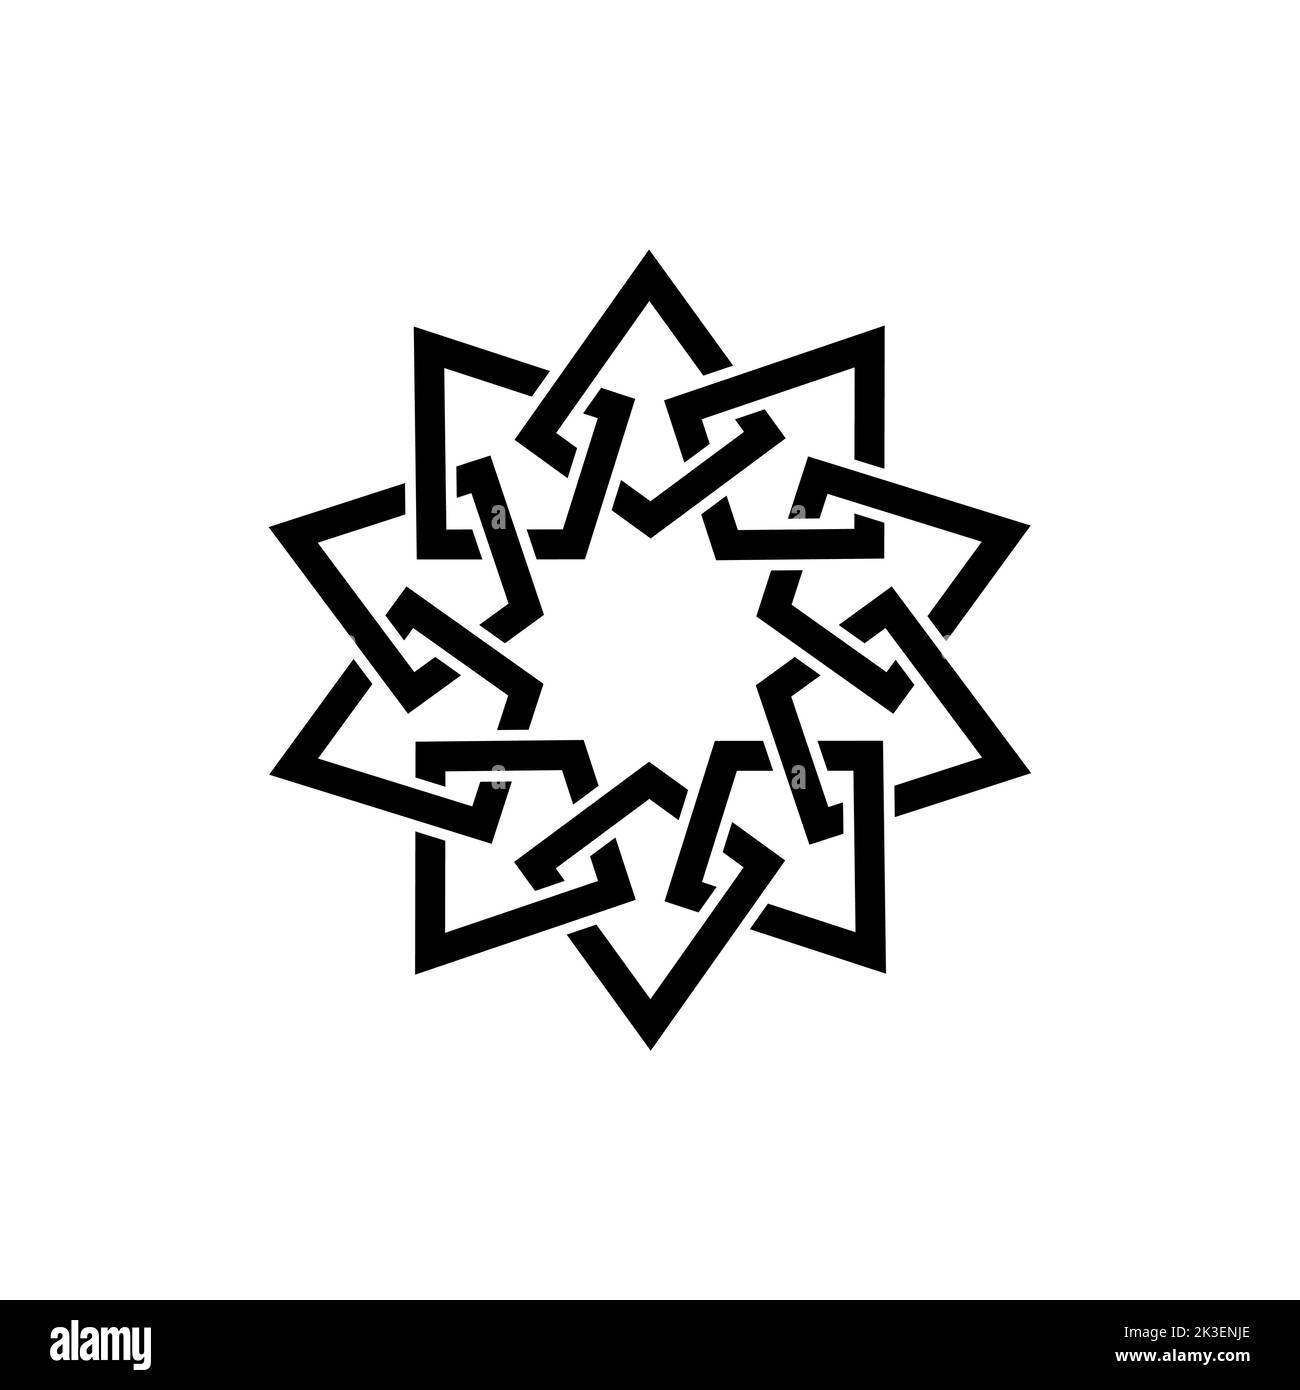 Geometric emblem template design with overlapping elements. Islamic motif. Celtic knot. Geometric pattern mandala in Arabic style, black logo isolated Stock Vector